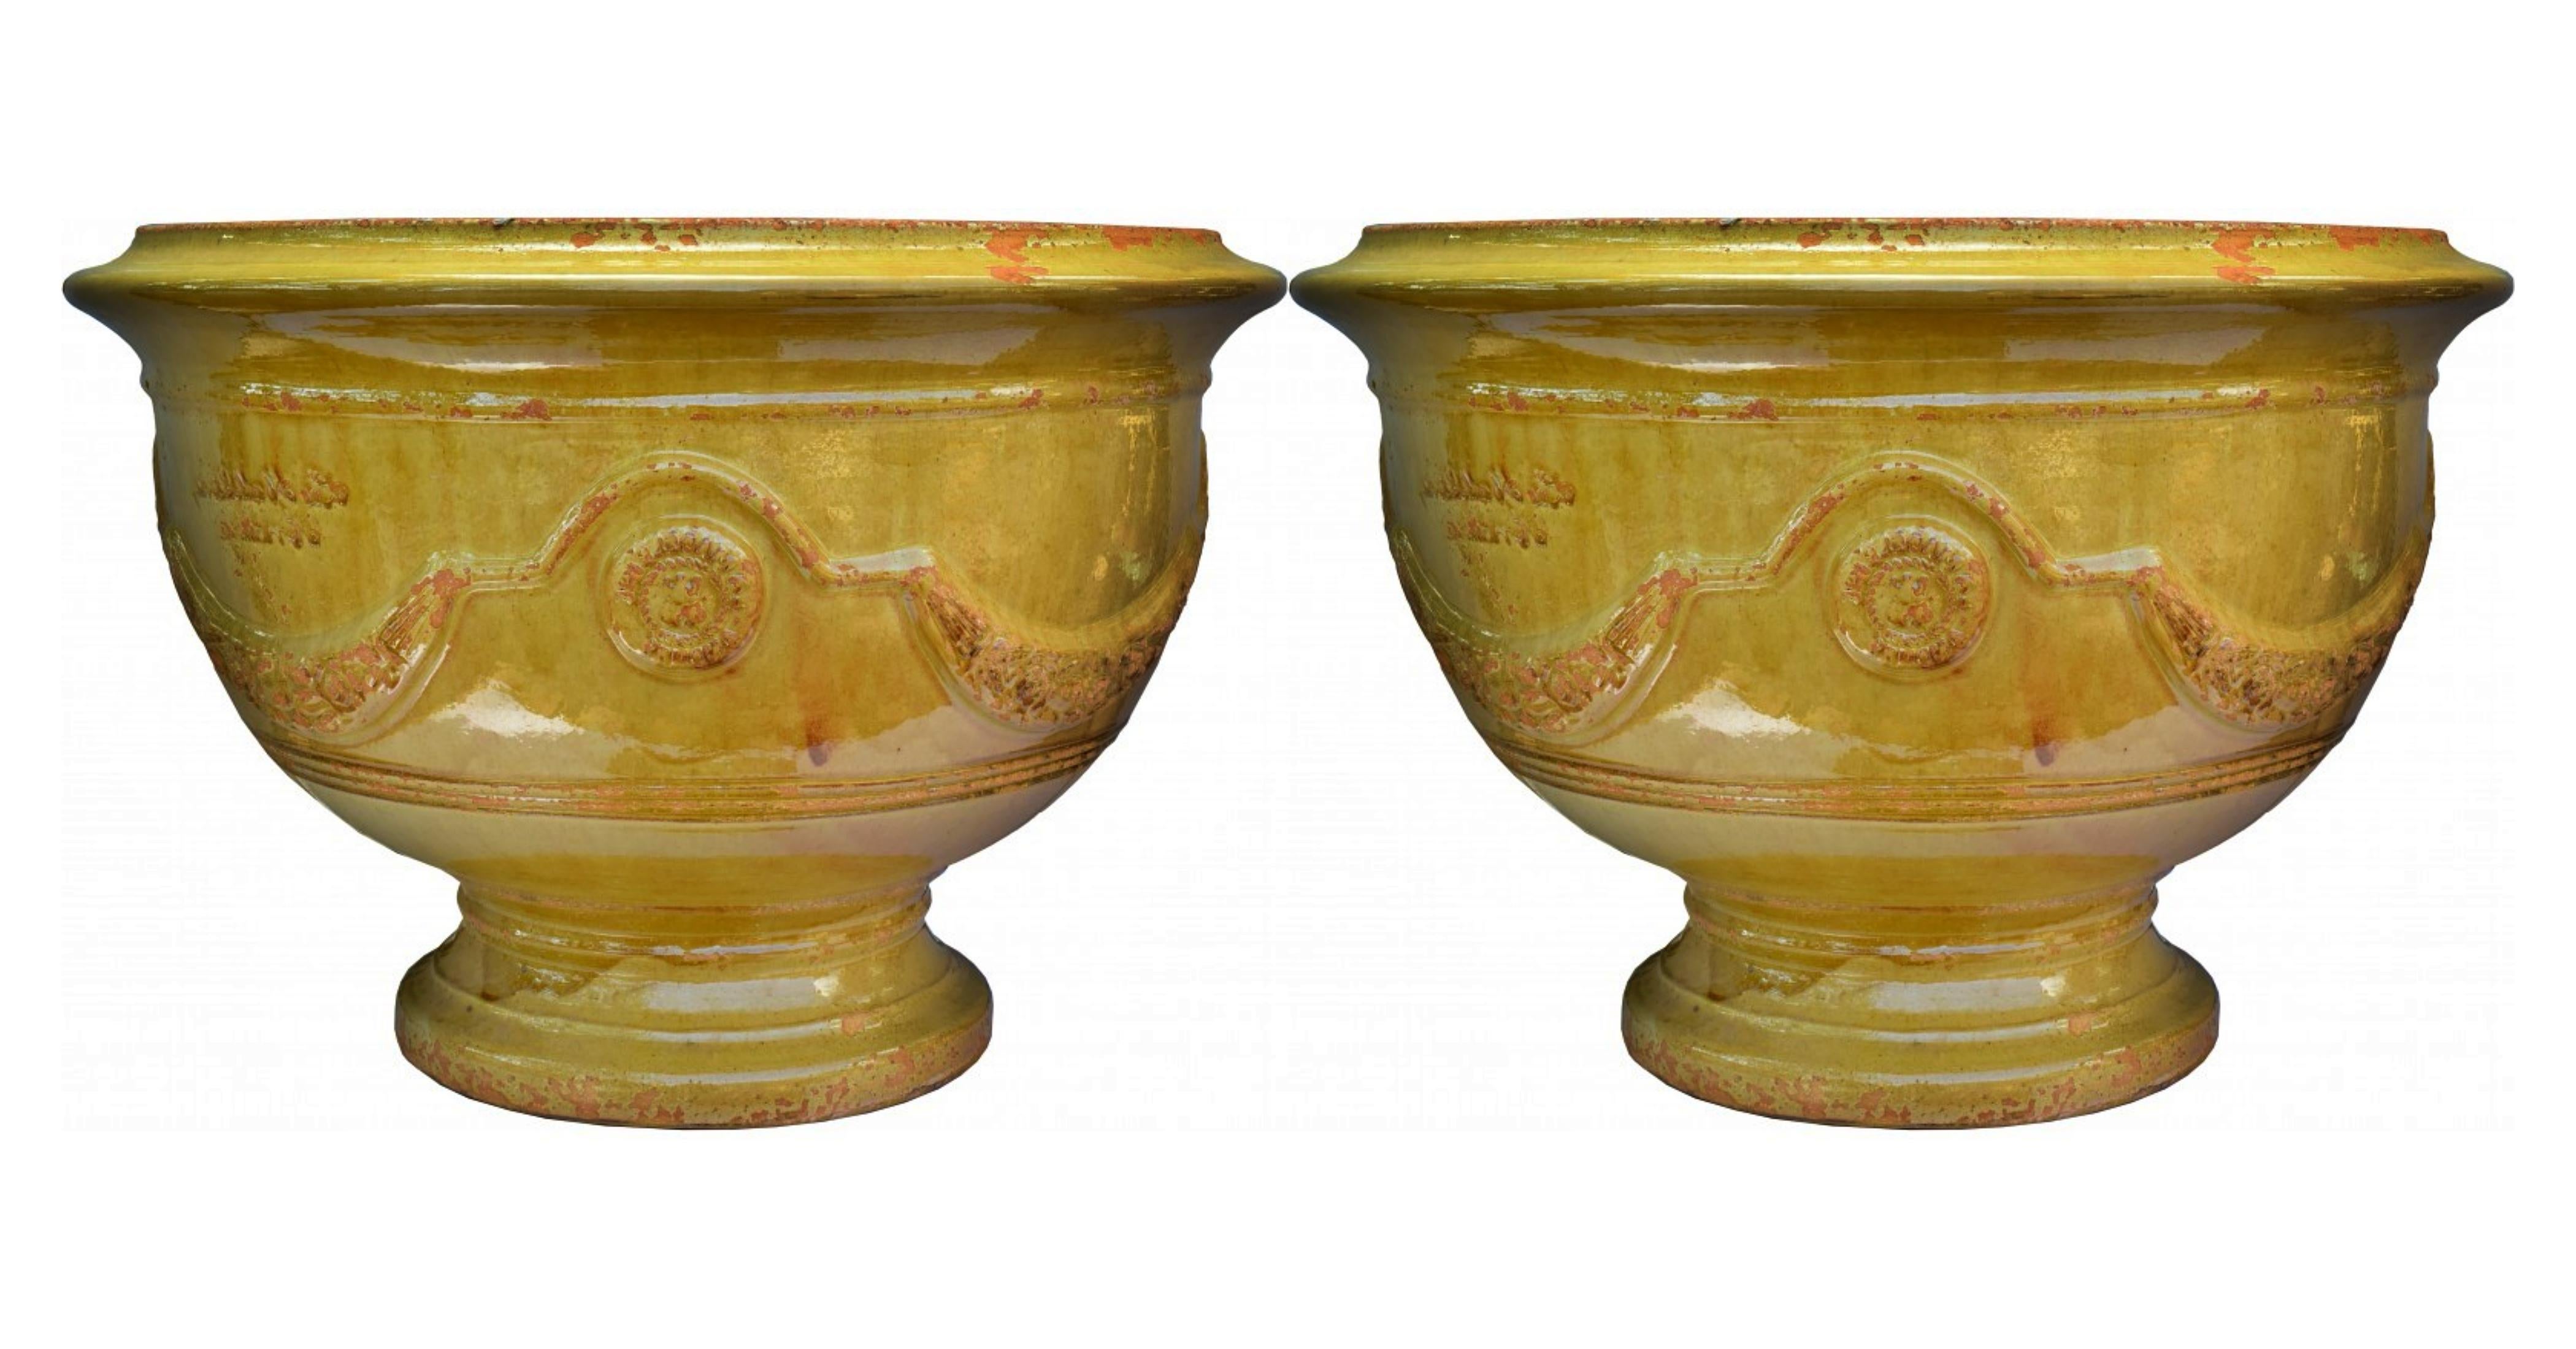 Pair of French Majolica vase from the Cévennes (France) early 20th Century

Anduze pots are an artisanal specialty of the Cevennes, a cultural region and mountain range in south-central France, located southeast of the Massif Central. It is a